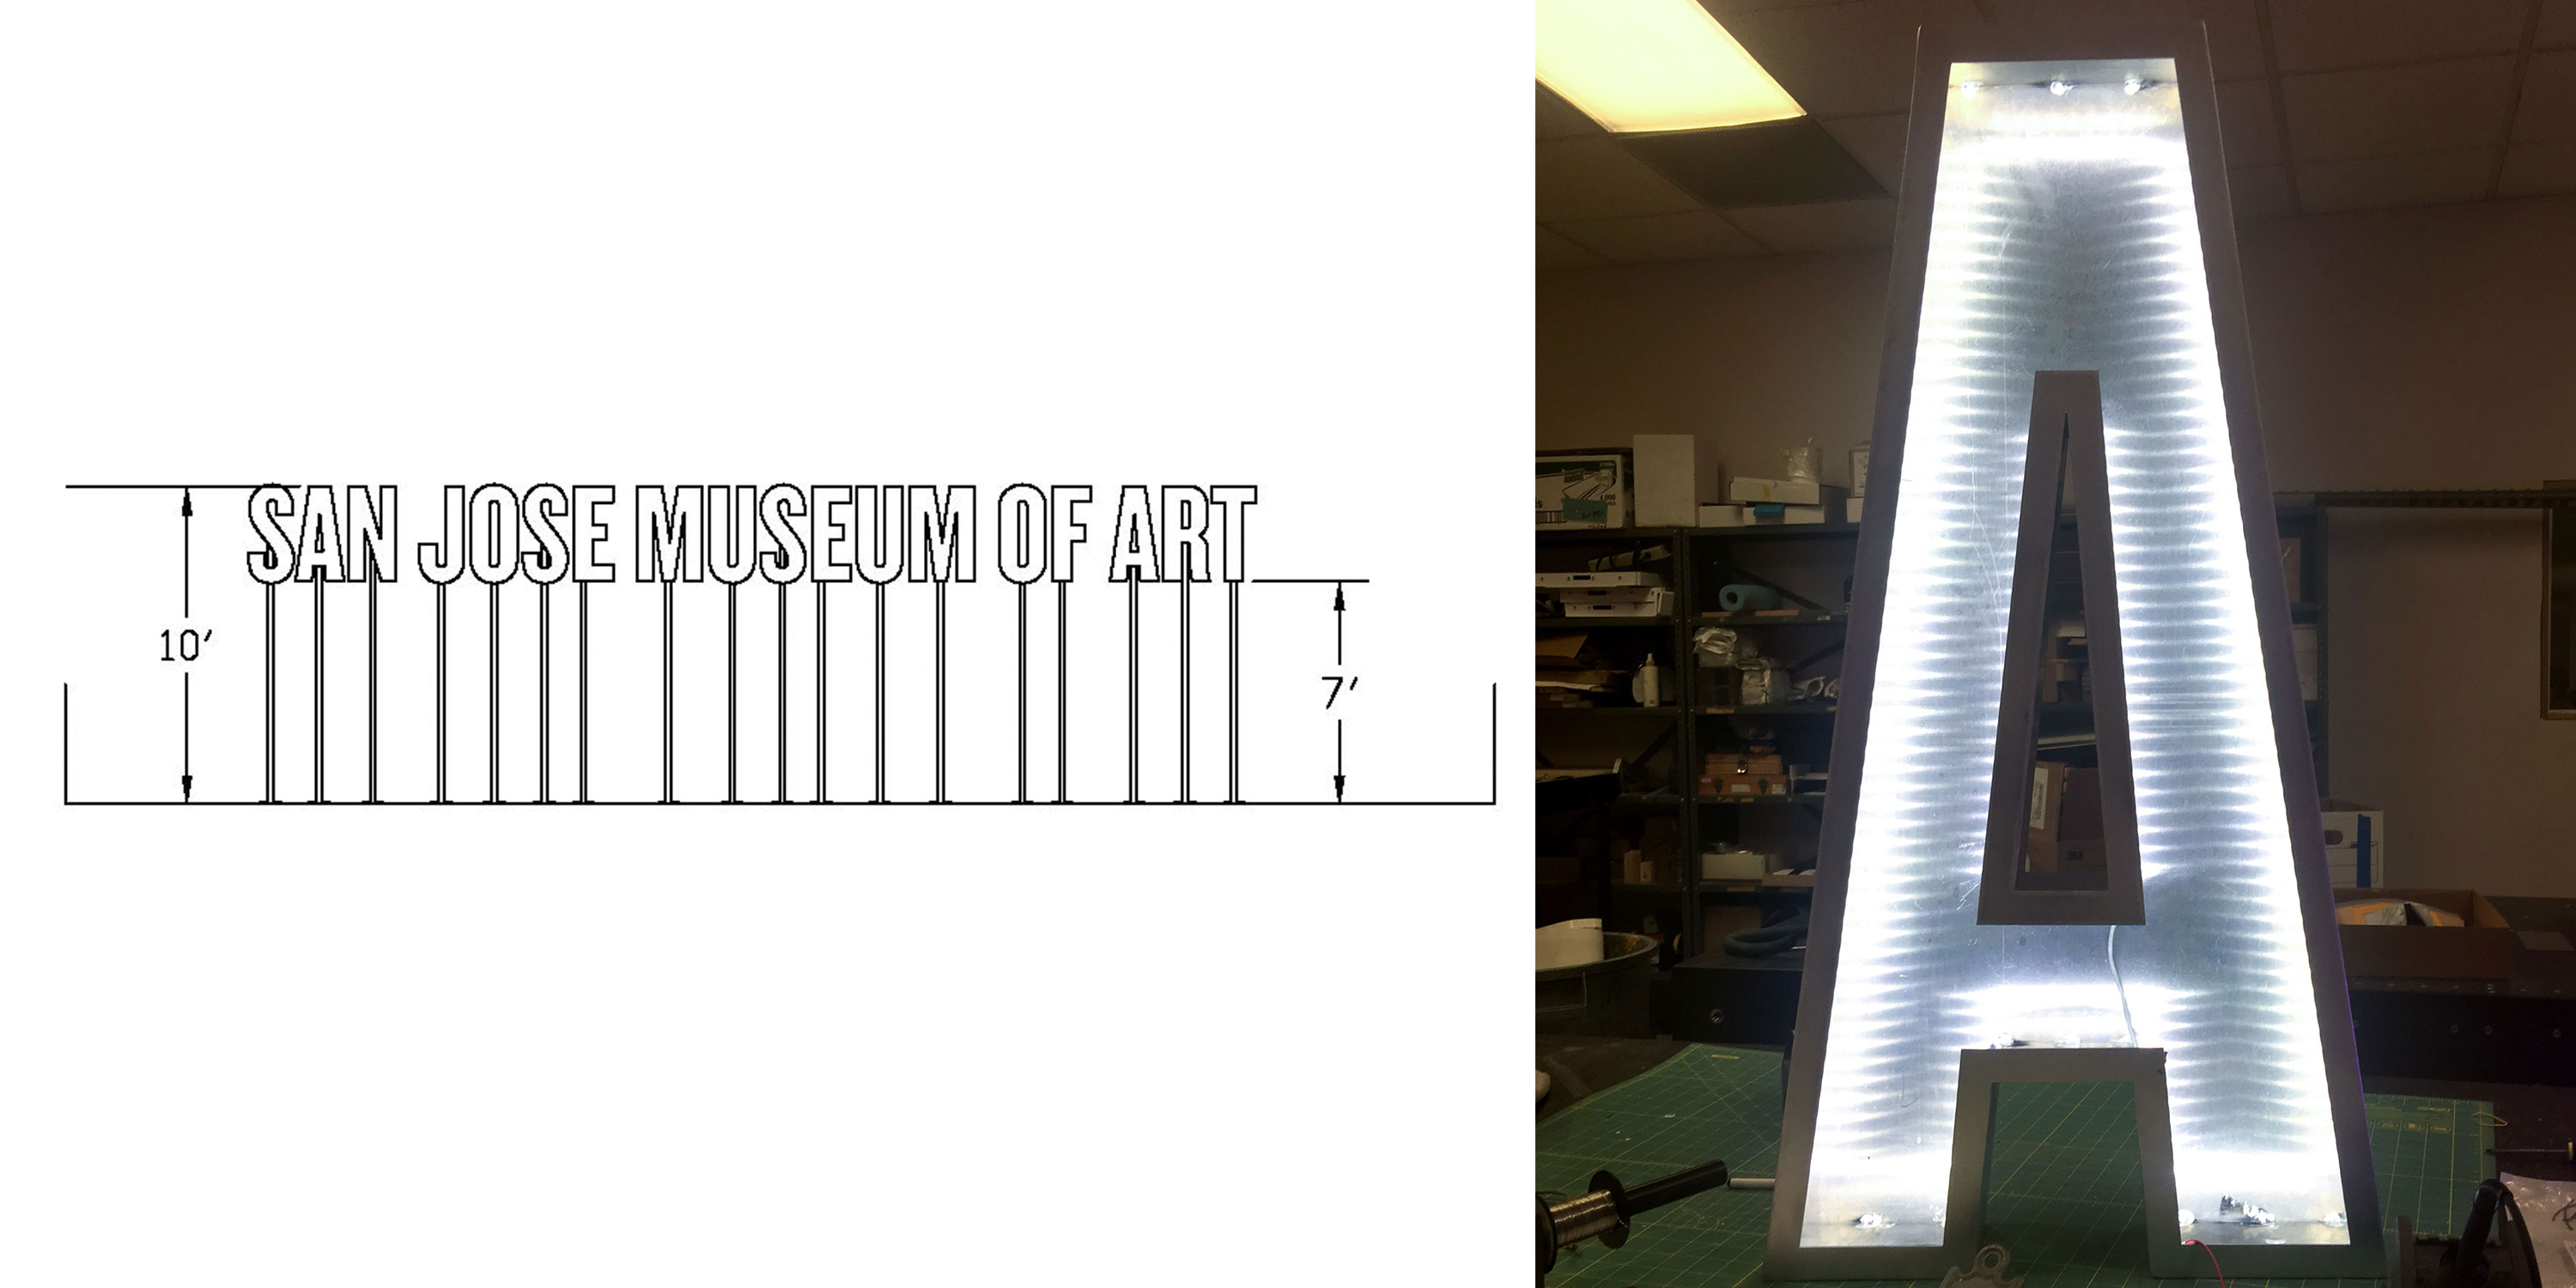 Jennifer Morla, signage for San Jose Museum of Art, currently in production.